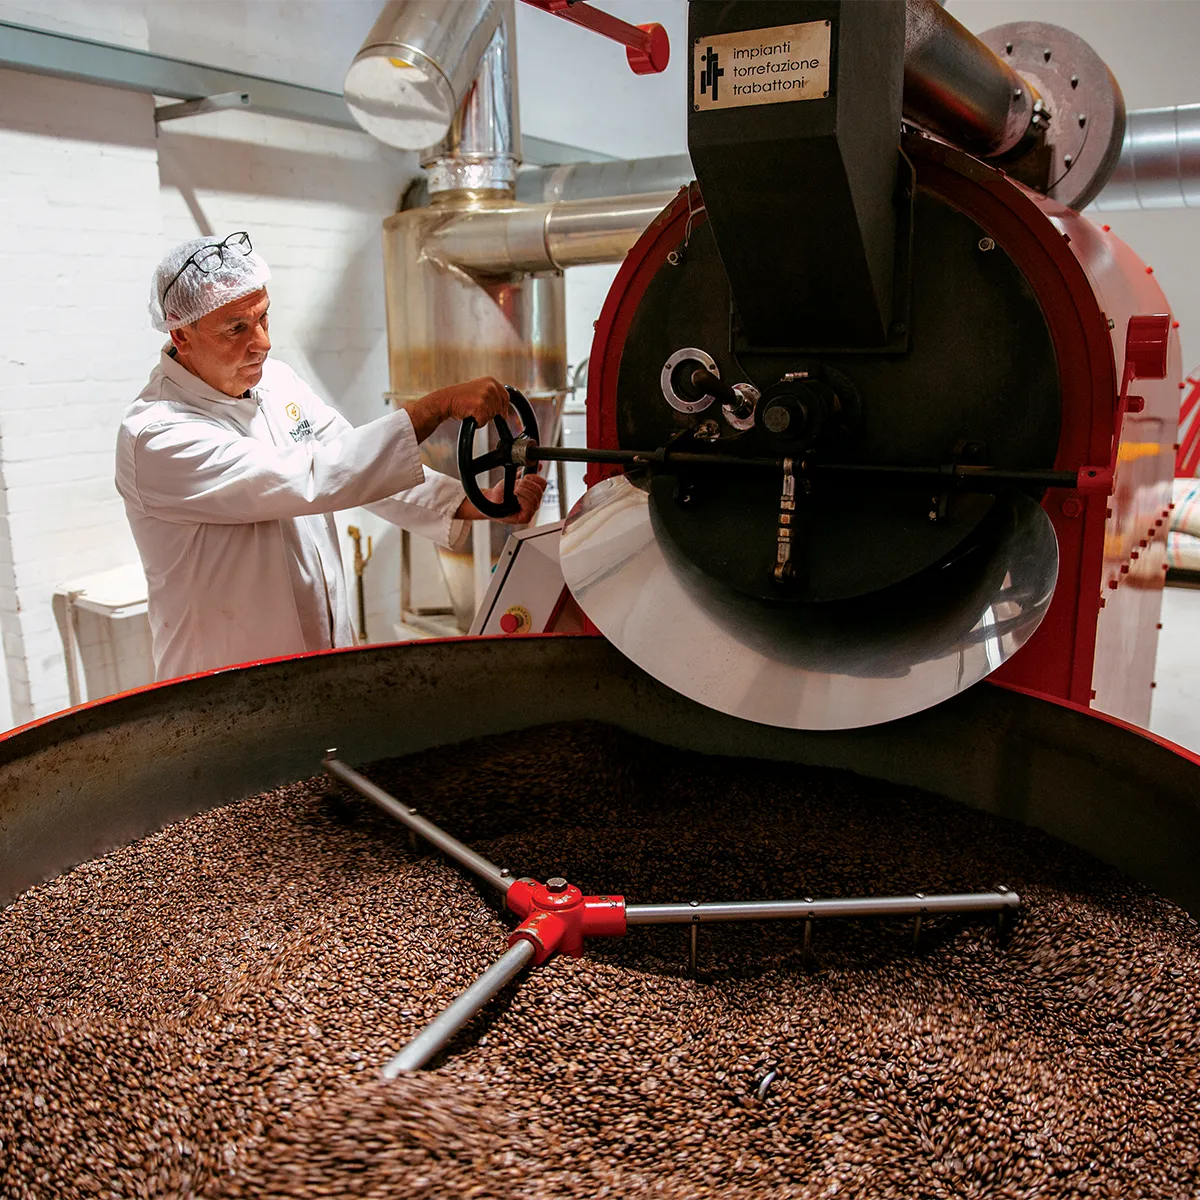 Ferrari's Coffee, Hand Roasted in wales, An image of our Original Trabattoni Roaster